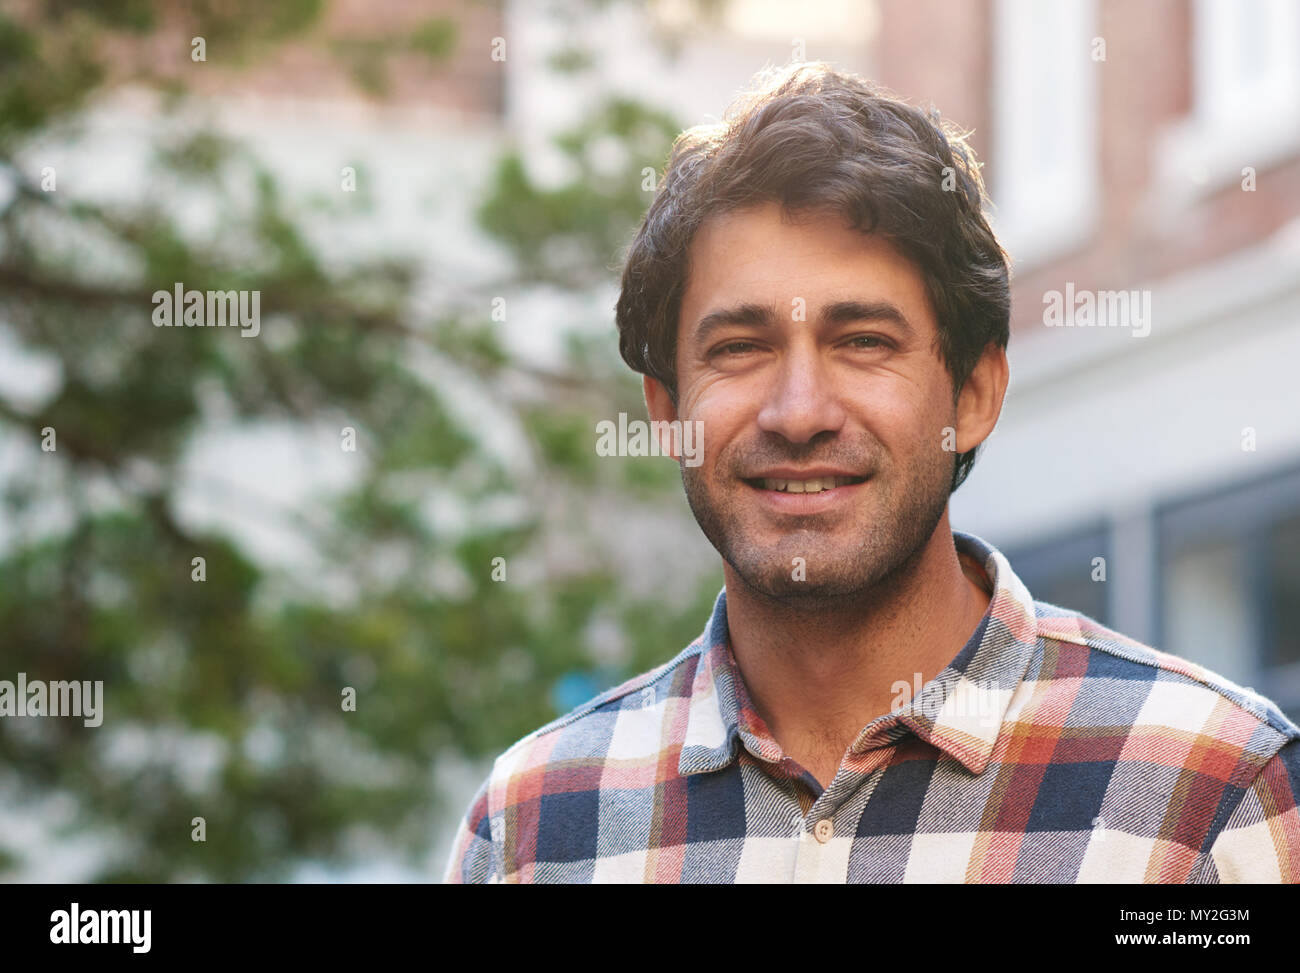 Closeup portrait of a casually dressed handsome man smiling while standing by himself on a street in the city on a sunny afternoon Stock Photo